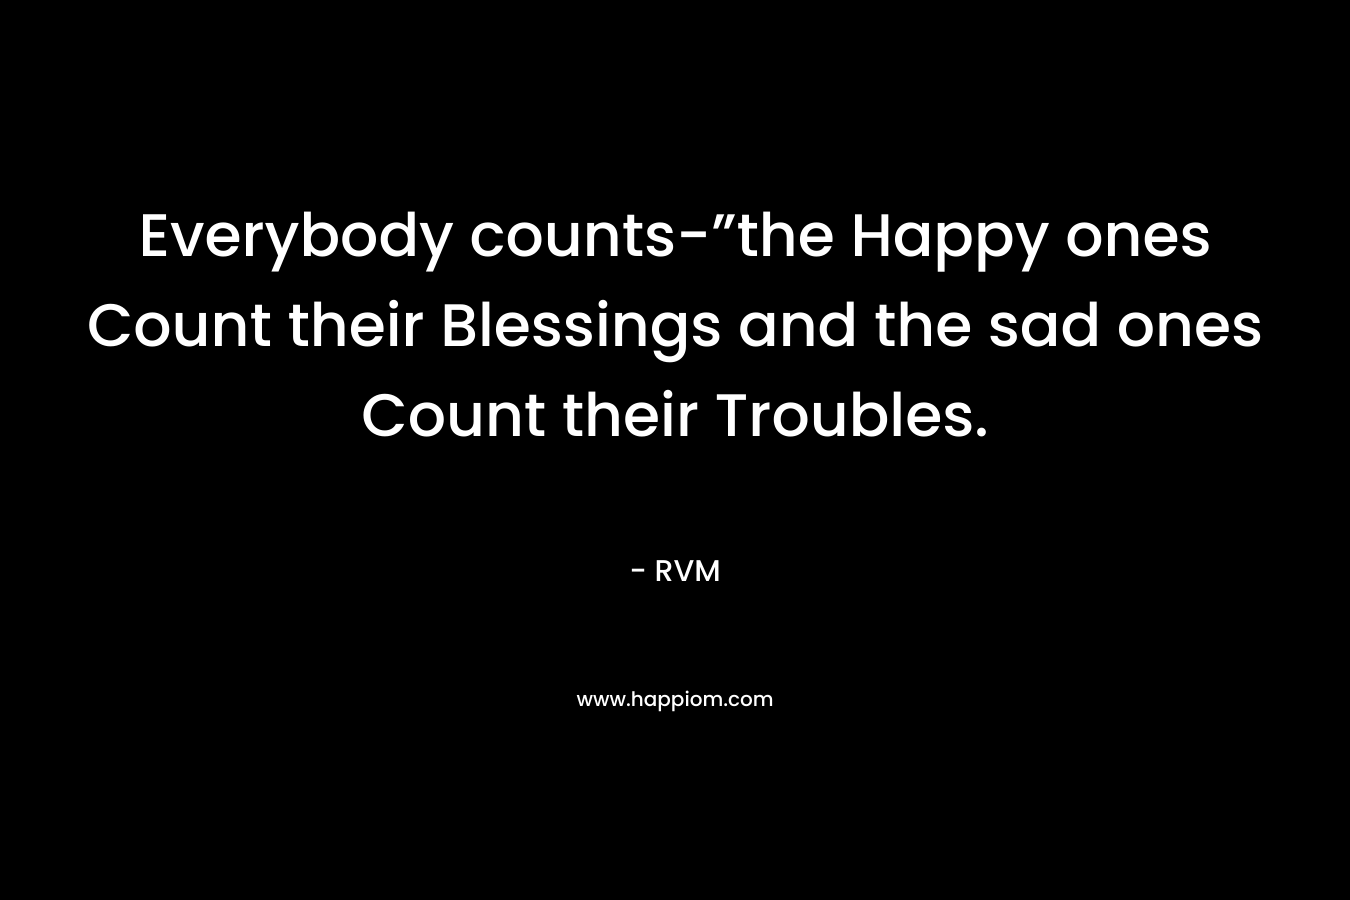 Everybody counts-”the Happy ones Count their Blessings and the sad ones Count their Troubles.